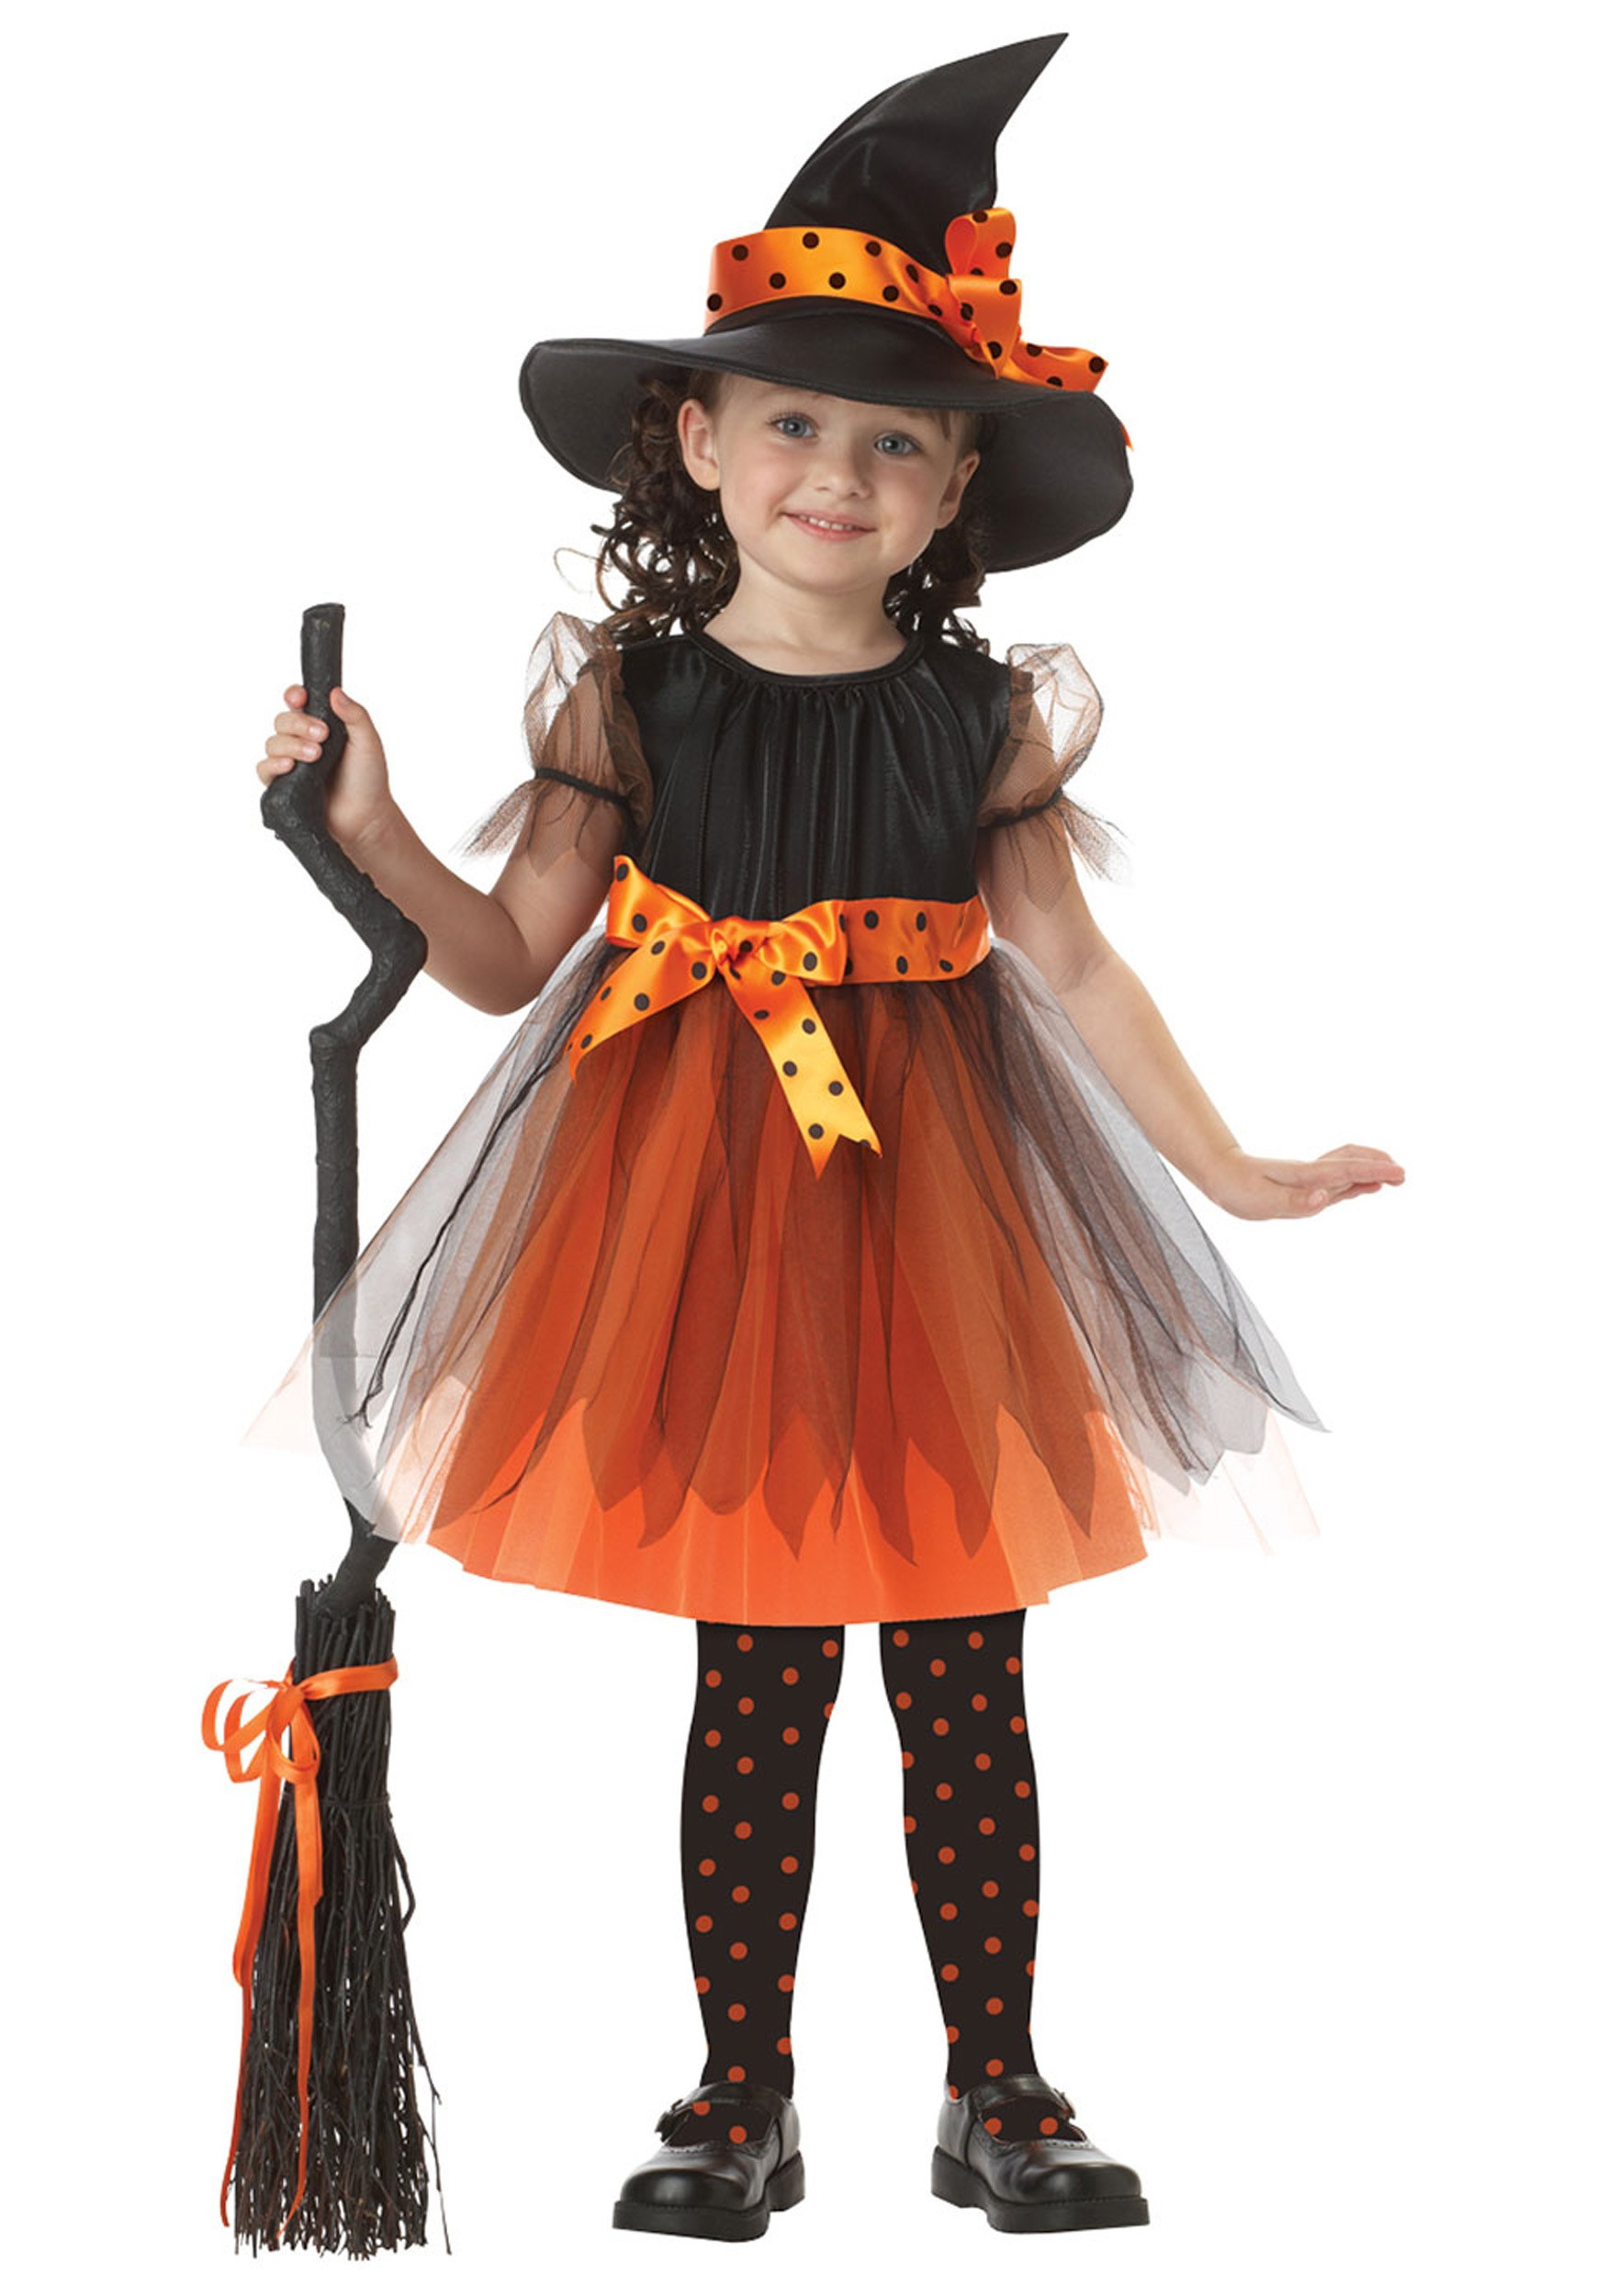 DIY Kids Witch Costume
 35 HALLOWEEN COSTUME IDEAS FOR KIDS Godfather Style